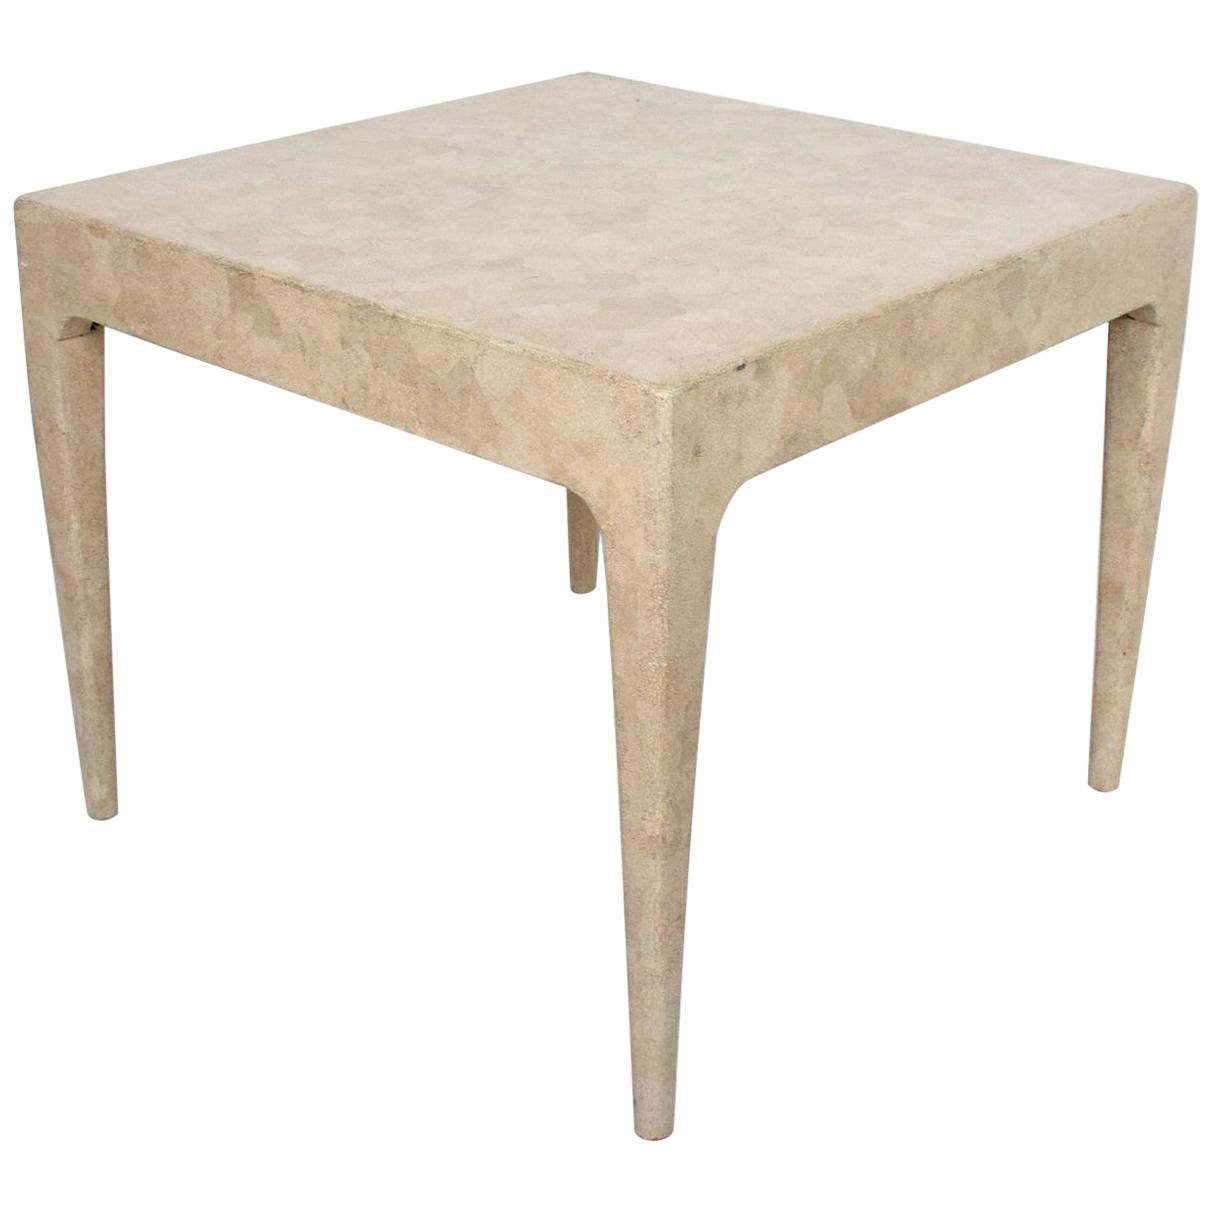 Aldo Tura style tessellated Blonde Wood Side Table.
wood frame has textured small stone fragments.
fabulous texture
style attributed to Maitland Smith inspiration of Aldo Tura.
Unmarked, ghost shadow of original label.
H 22.13 in. x W 27 in. x D 27